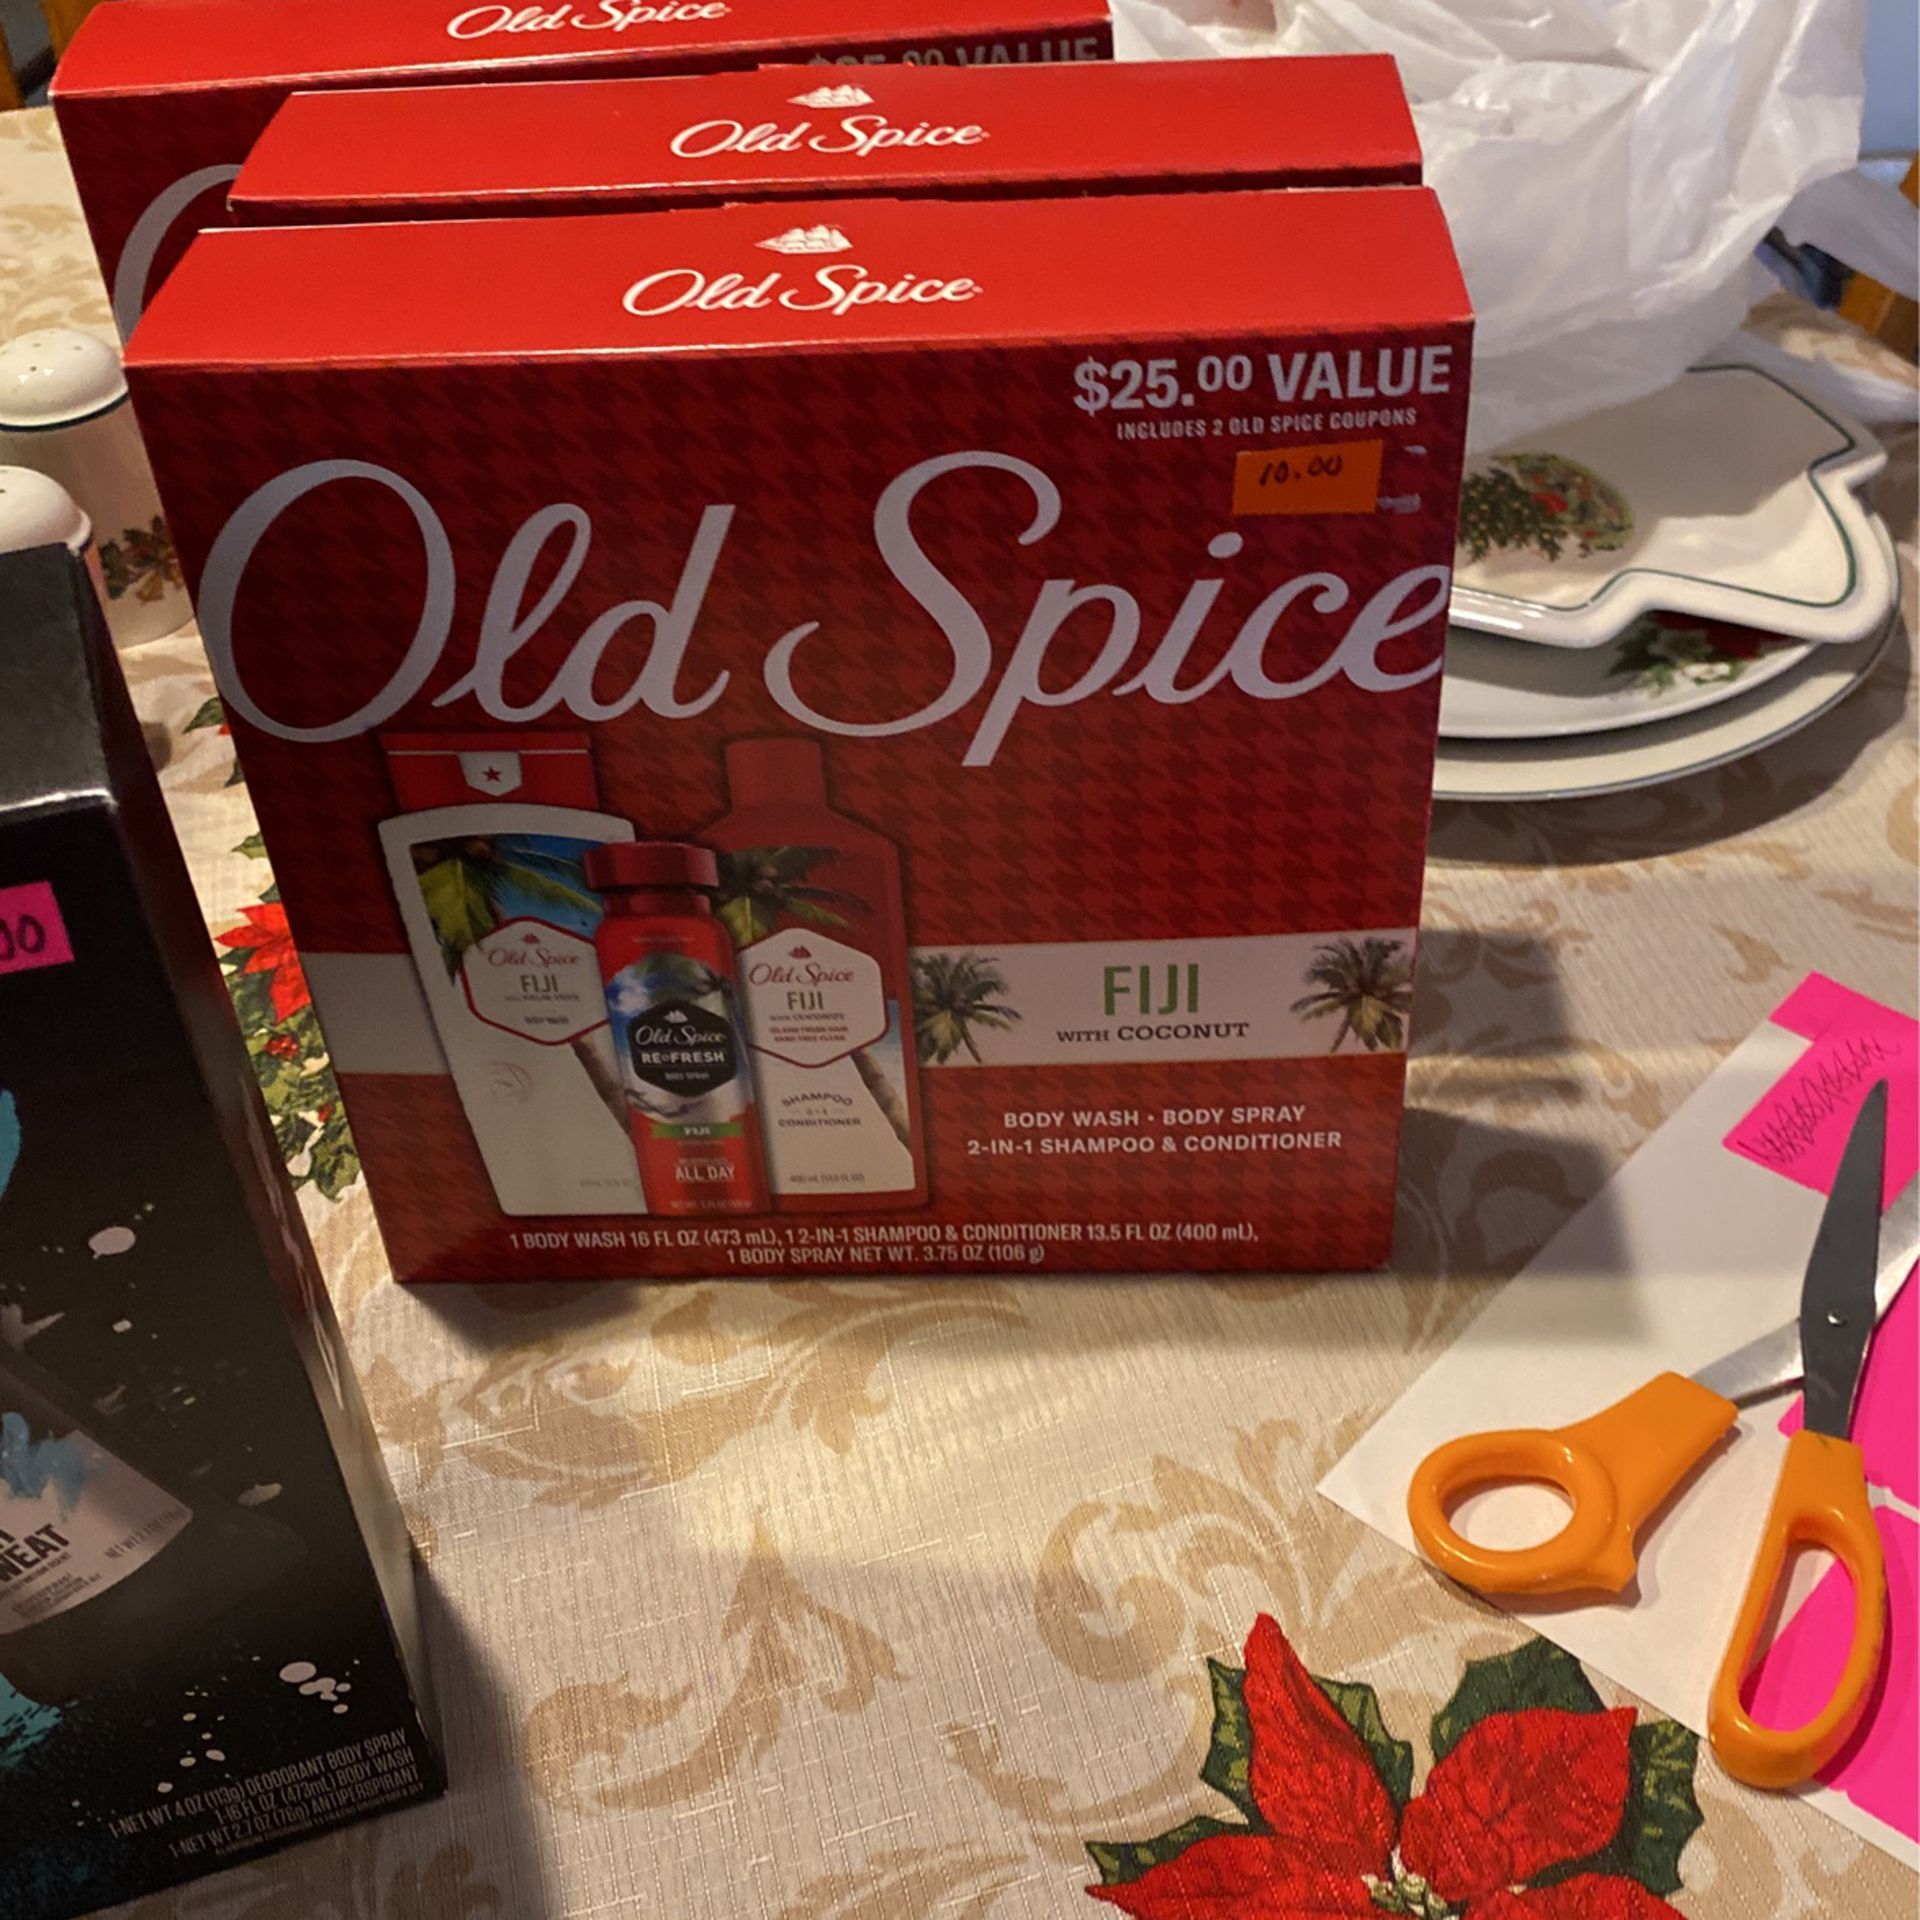 AXE AND OLD SPICE GIFT SETS